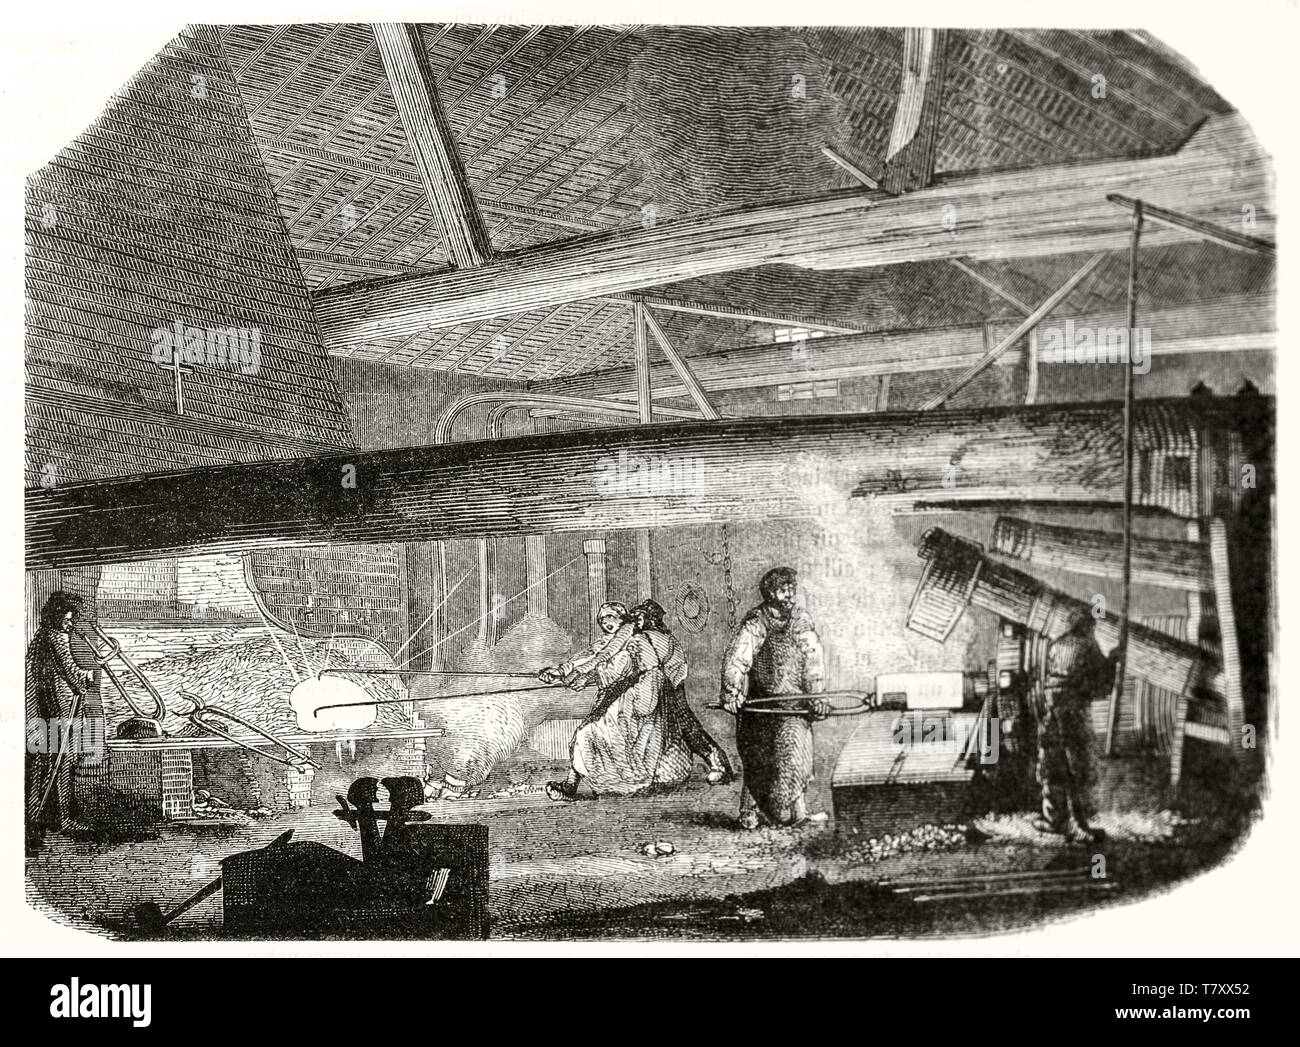 Ancient workers using machines in a warm foundry. Grayscale etching style illustration by unidentified author publ. on Magasin Pittoresque Paris 1848 Stock Photo